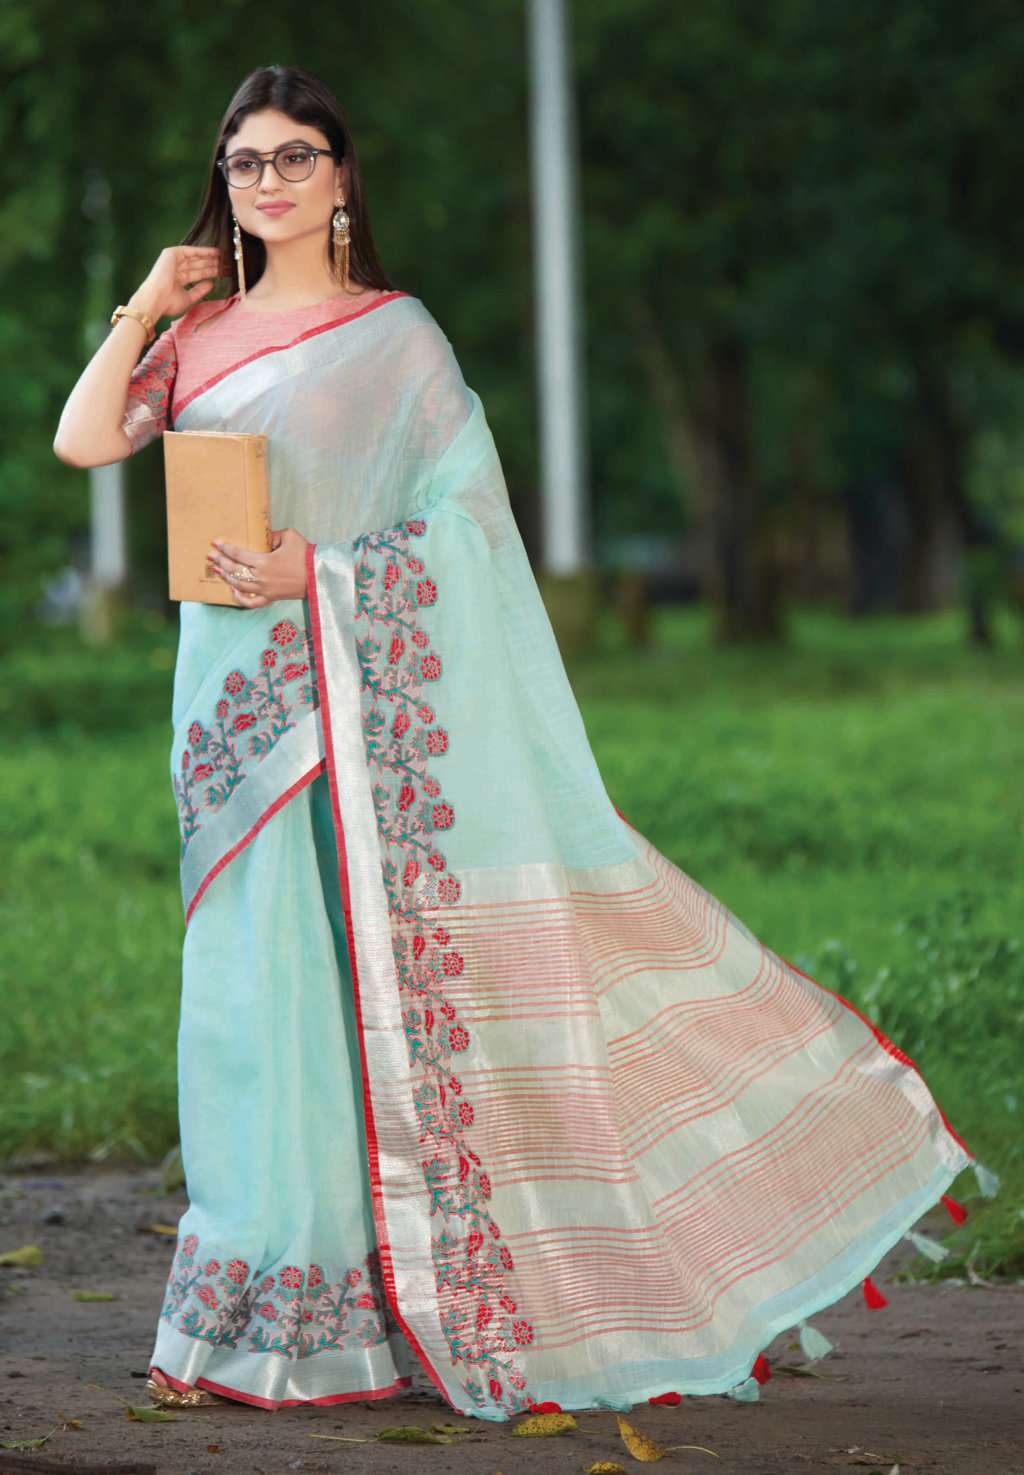 Sangam Aadya Linen Embroidery Linen Party Wear Low Rate Saree Catalog